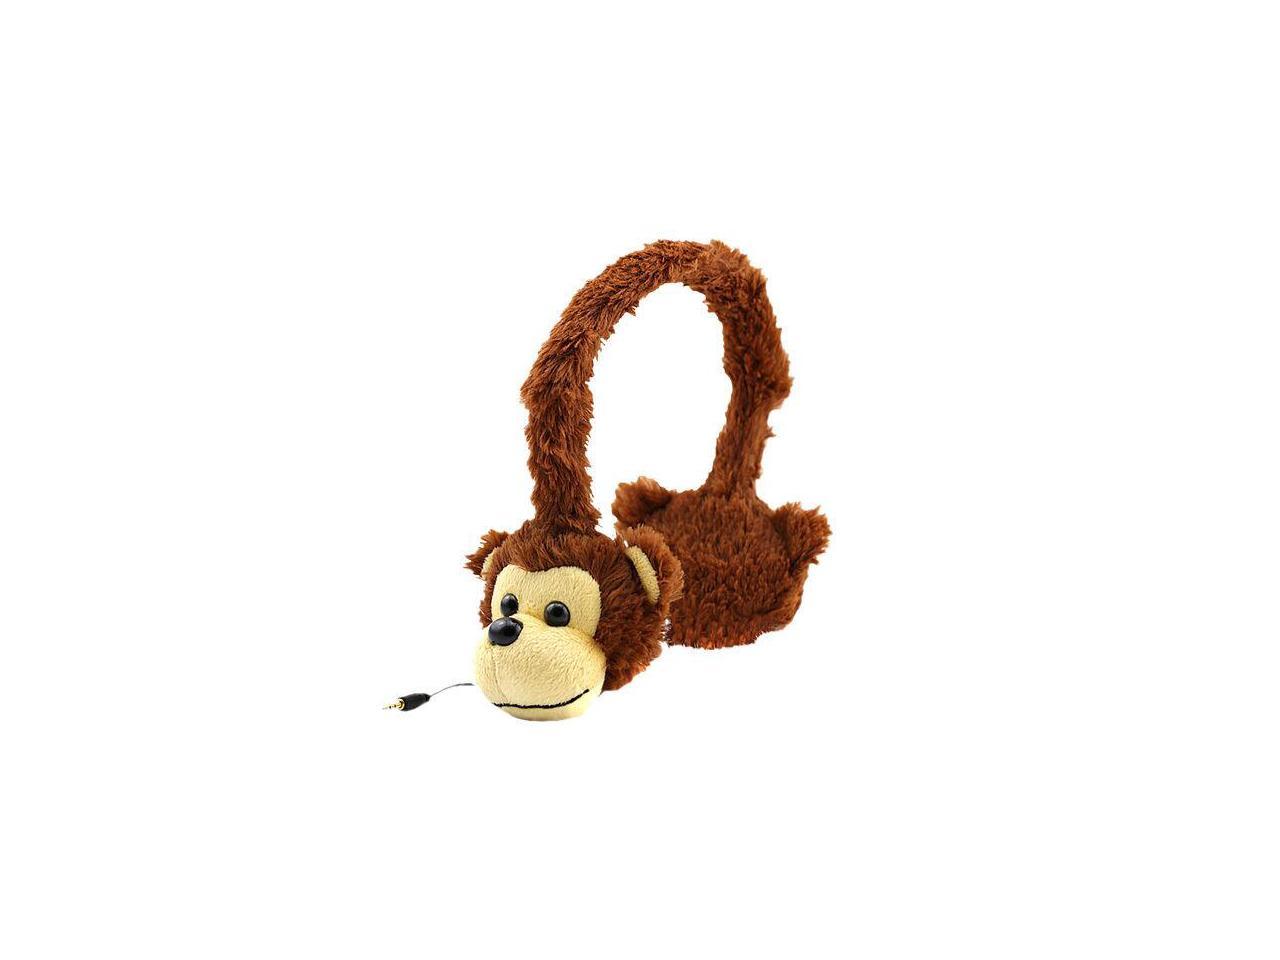 Dairle P02 Monkey Cute Animal Kids Music Headphones with Adjustable Headband for Smartphone, Mp4, PC, Laptop (No Microphone) -Light Brown